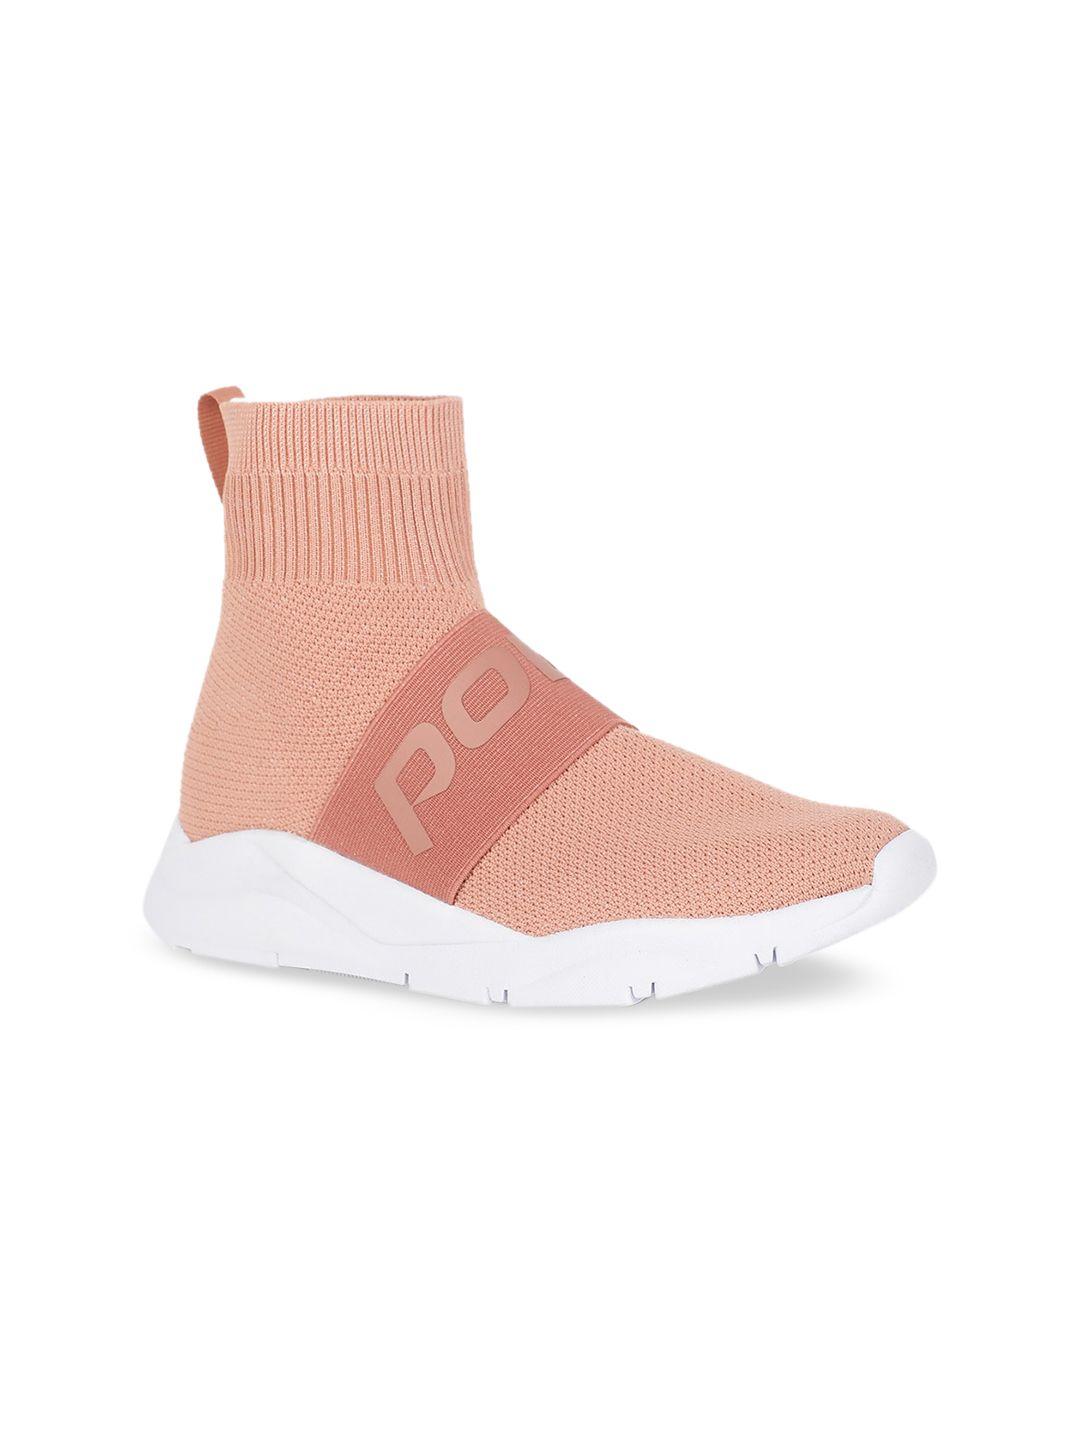 power women peach-coloured solid high-top slip-on sneakers